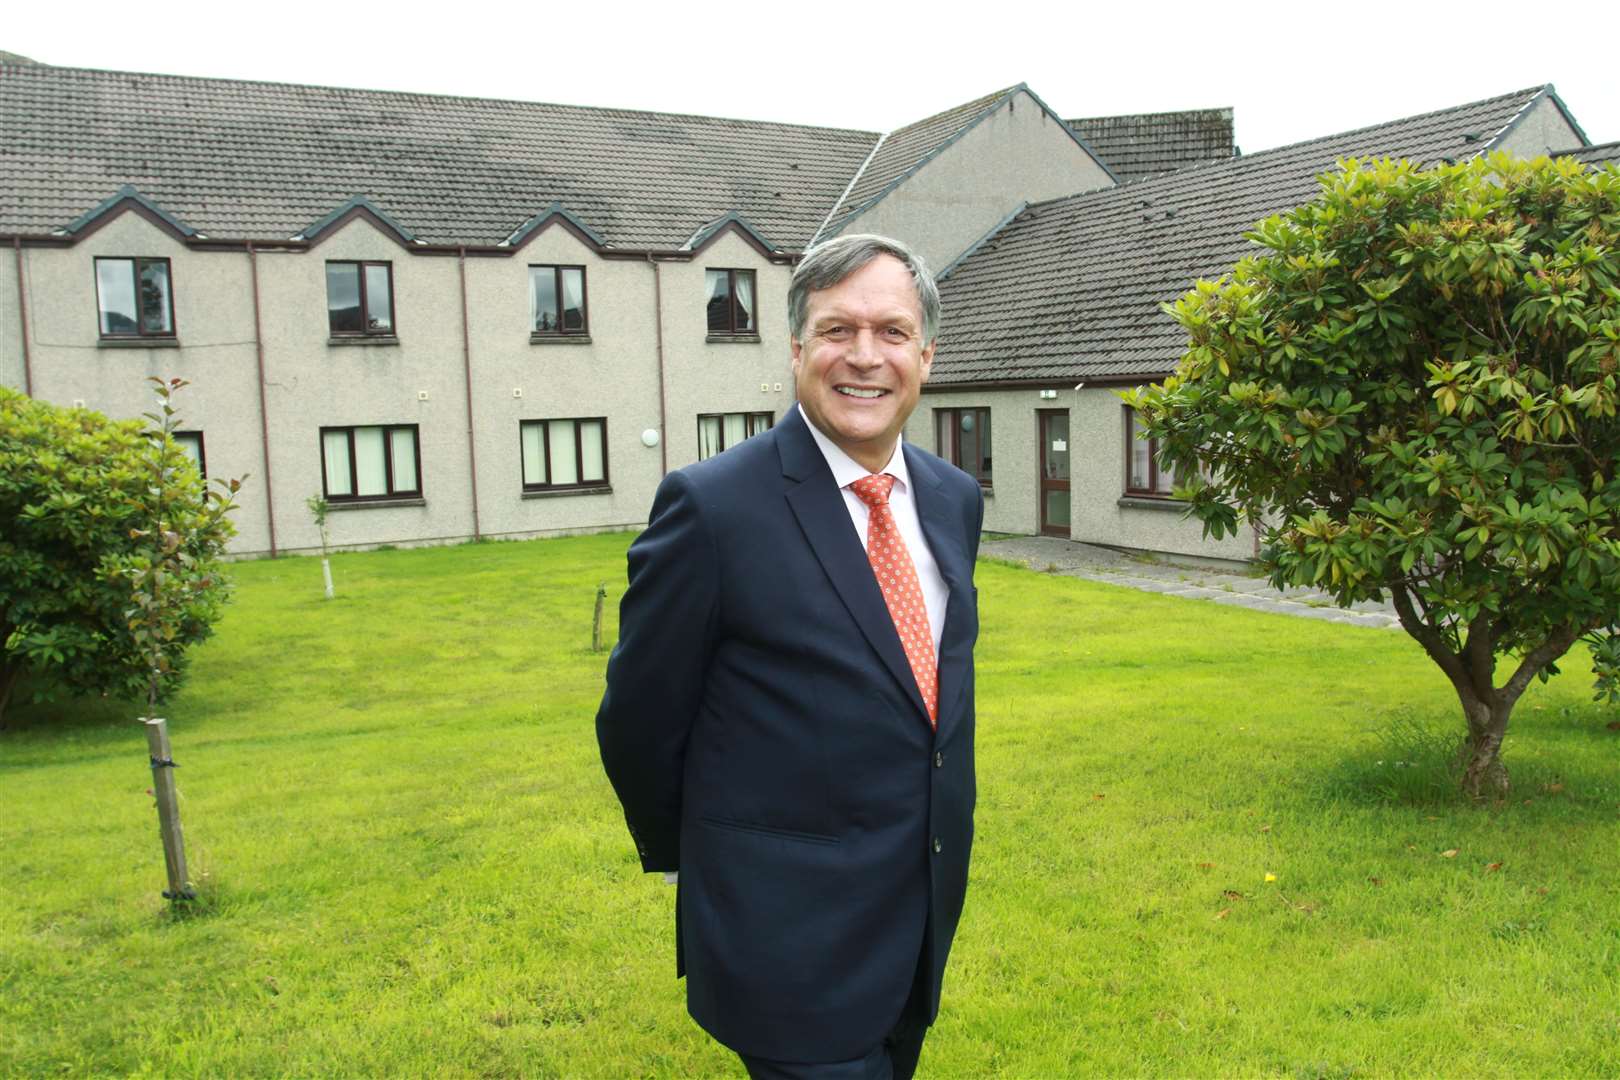 Ron Taylor at Mo Dhachaich before the closure was announced: 'I have made it clear that we have no intention of profiting from the sale of Mo Dhachaidh. We are continuing to have discussions with the local community to determine the best course of action for the future of the building.'